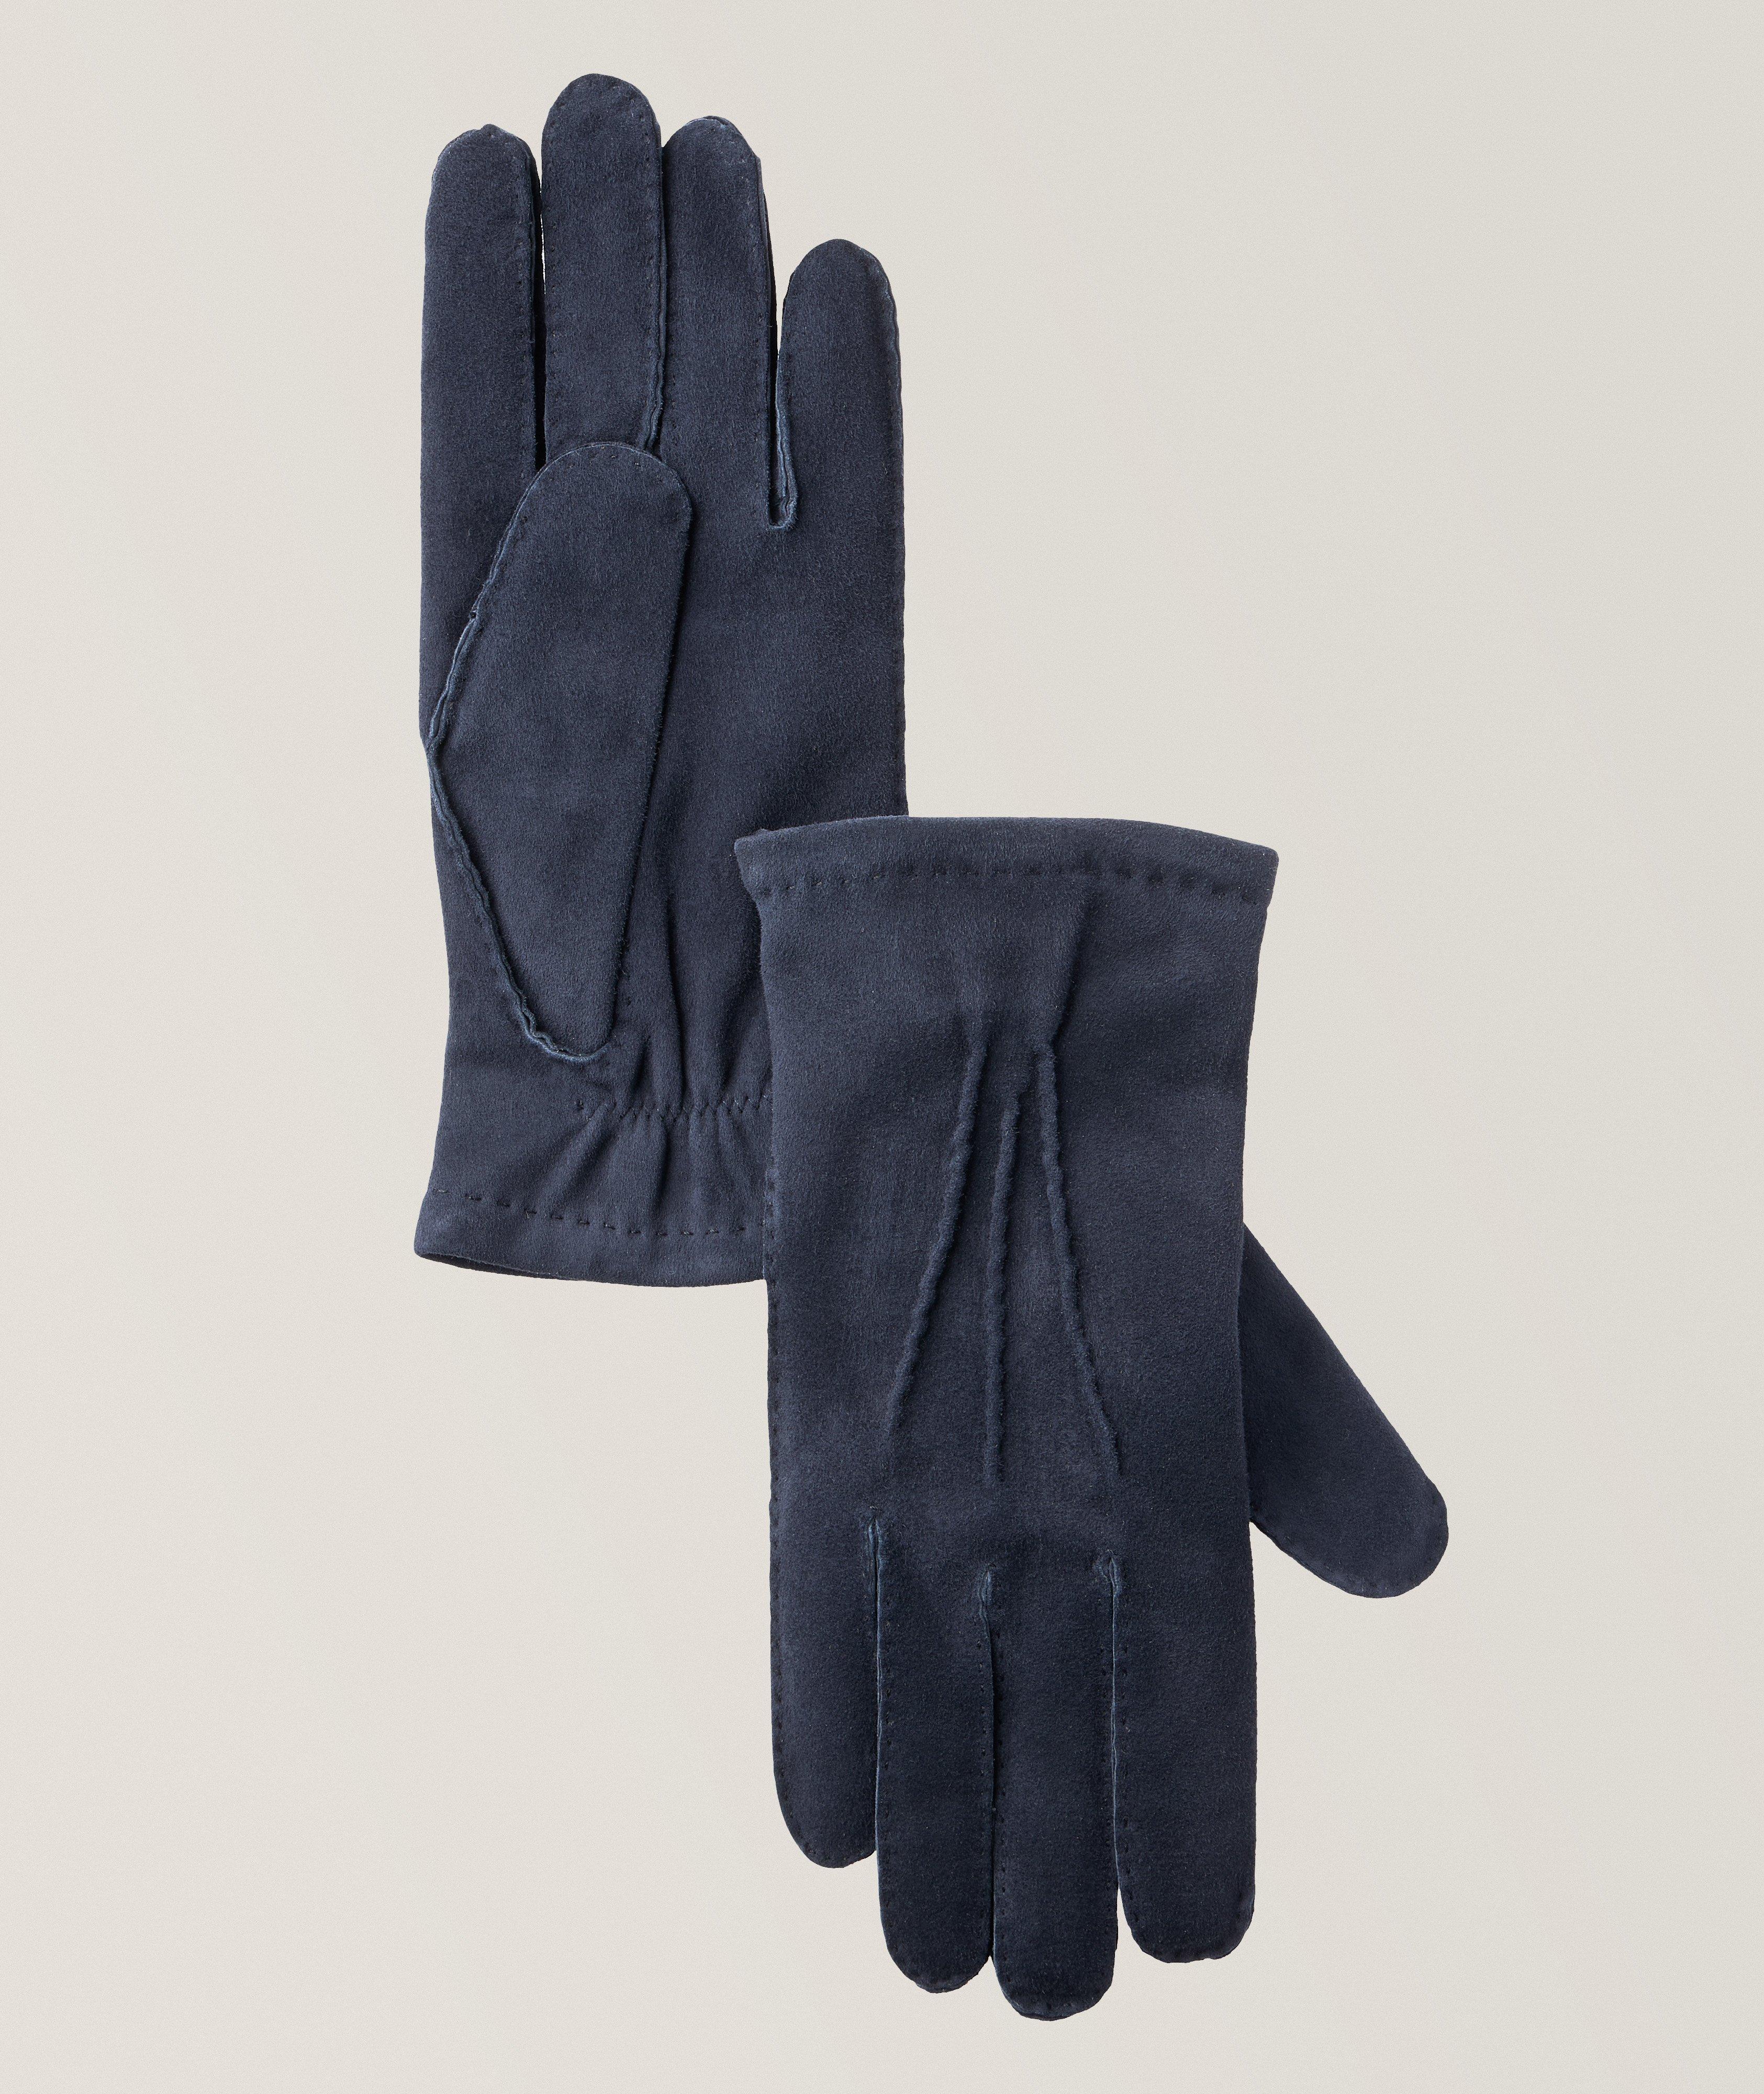 Handsewn Sheep Hair Suede & Cashmere Gloves image 0